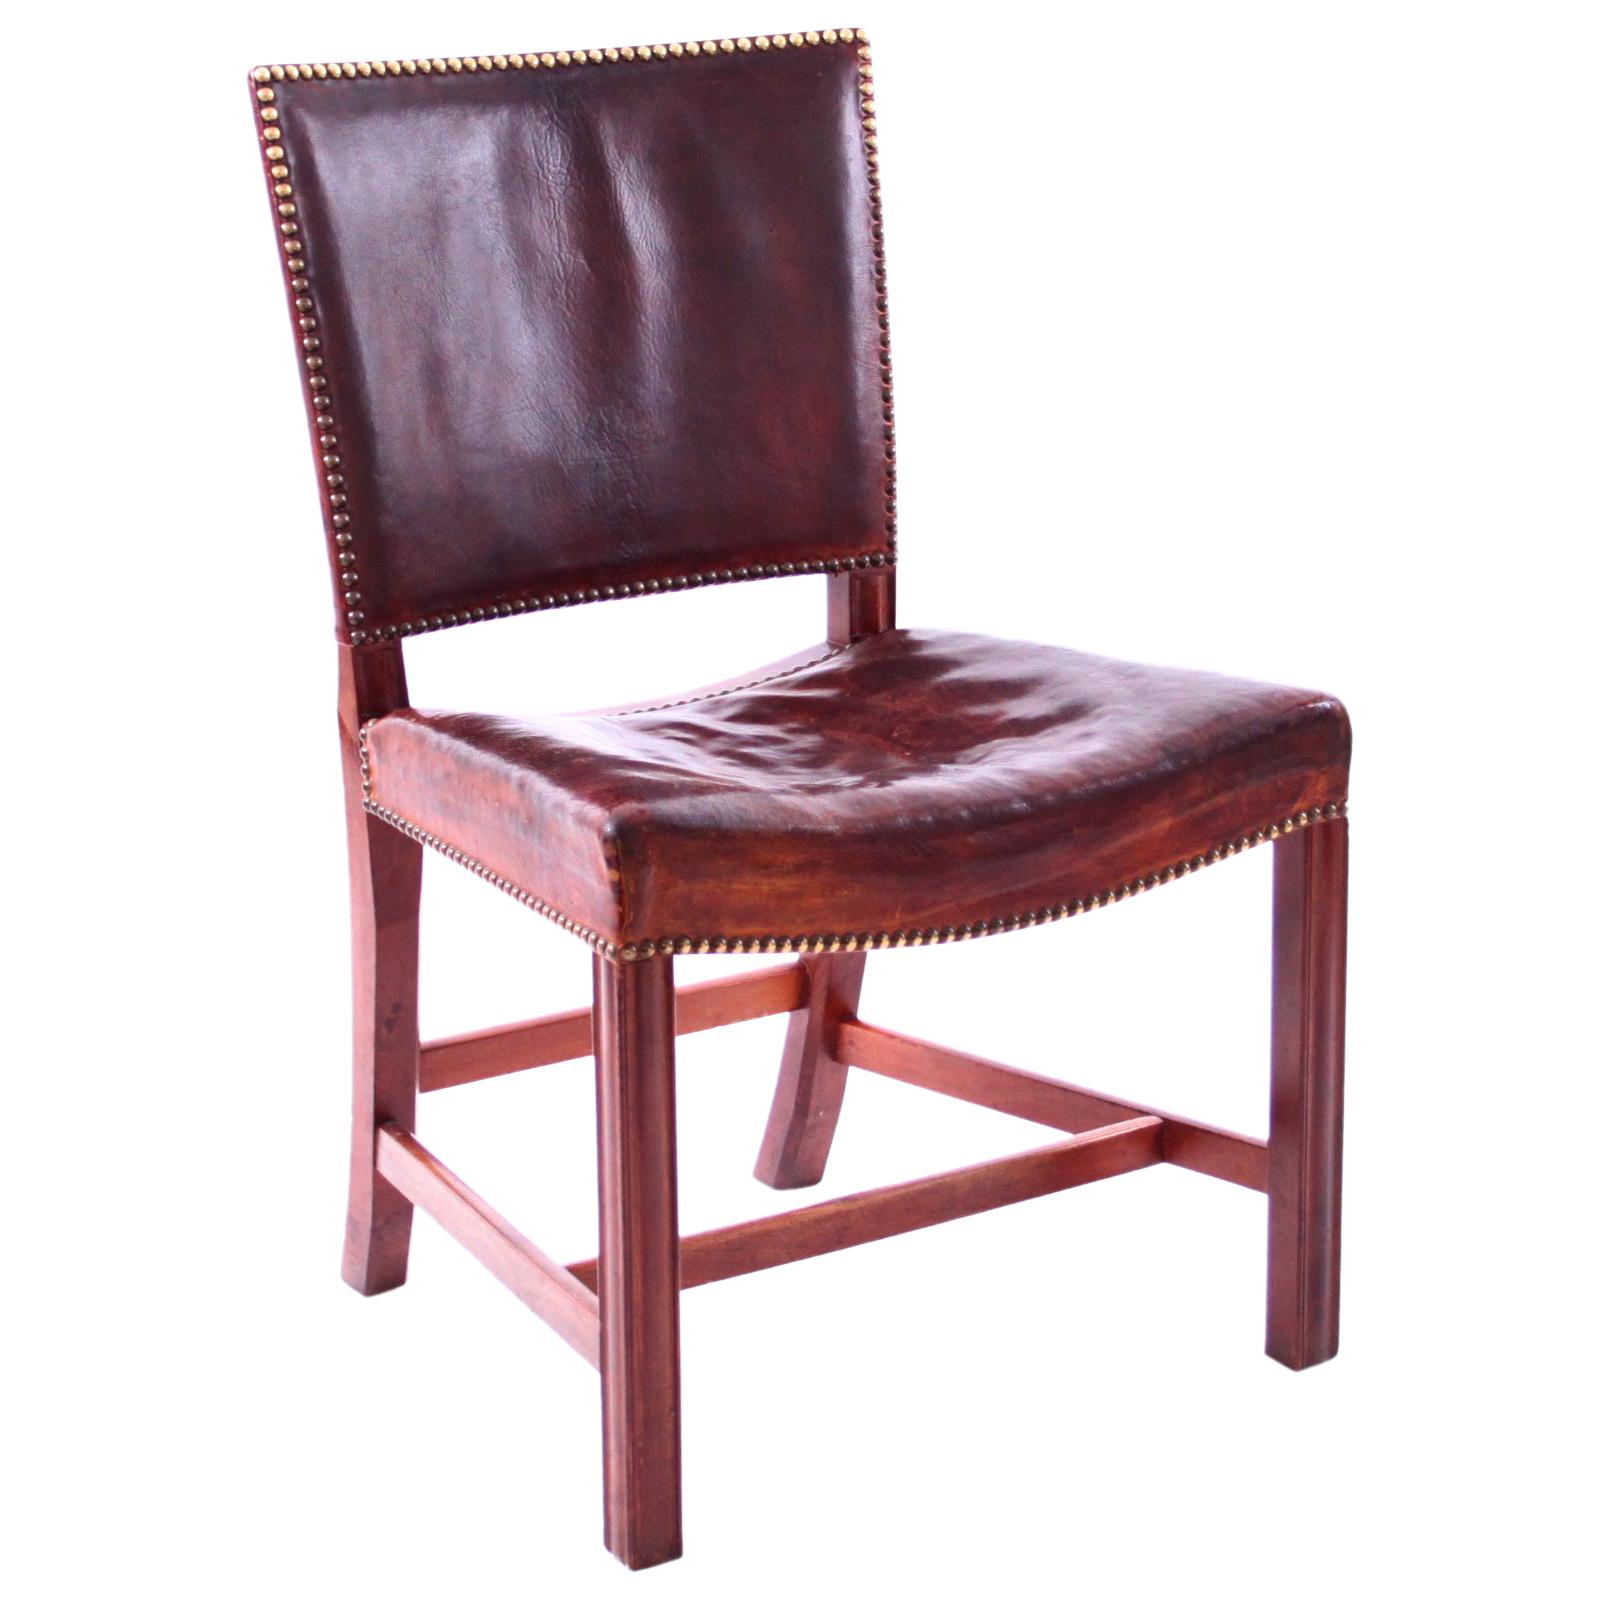 Kaare Klint Large "Red Chair" with Original Patinated Nigerian Leather